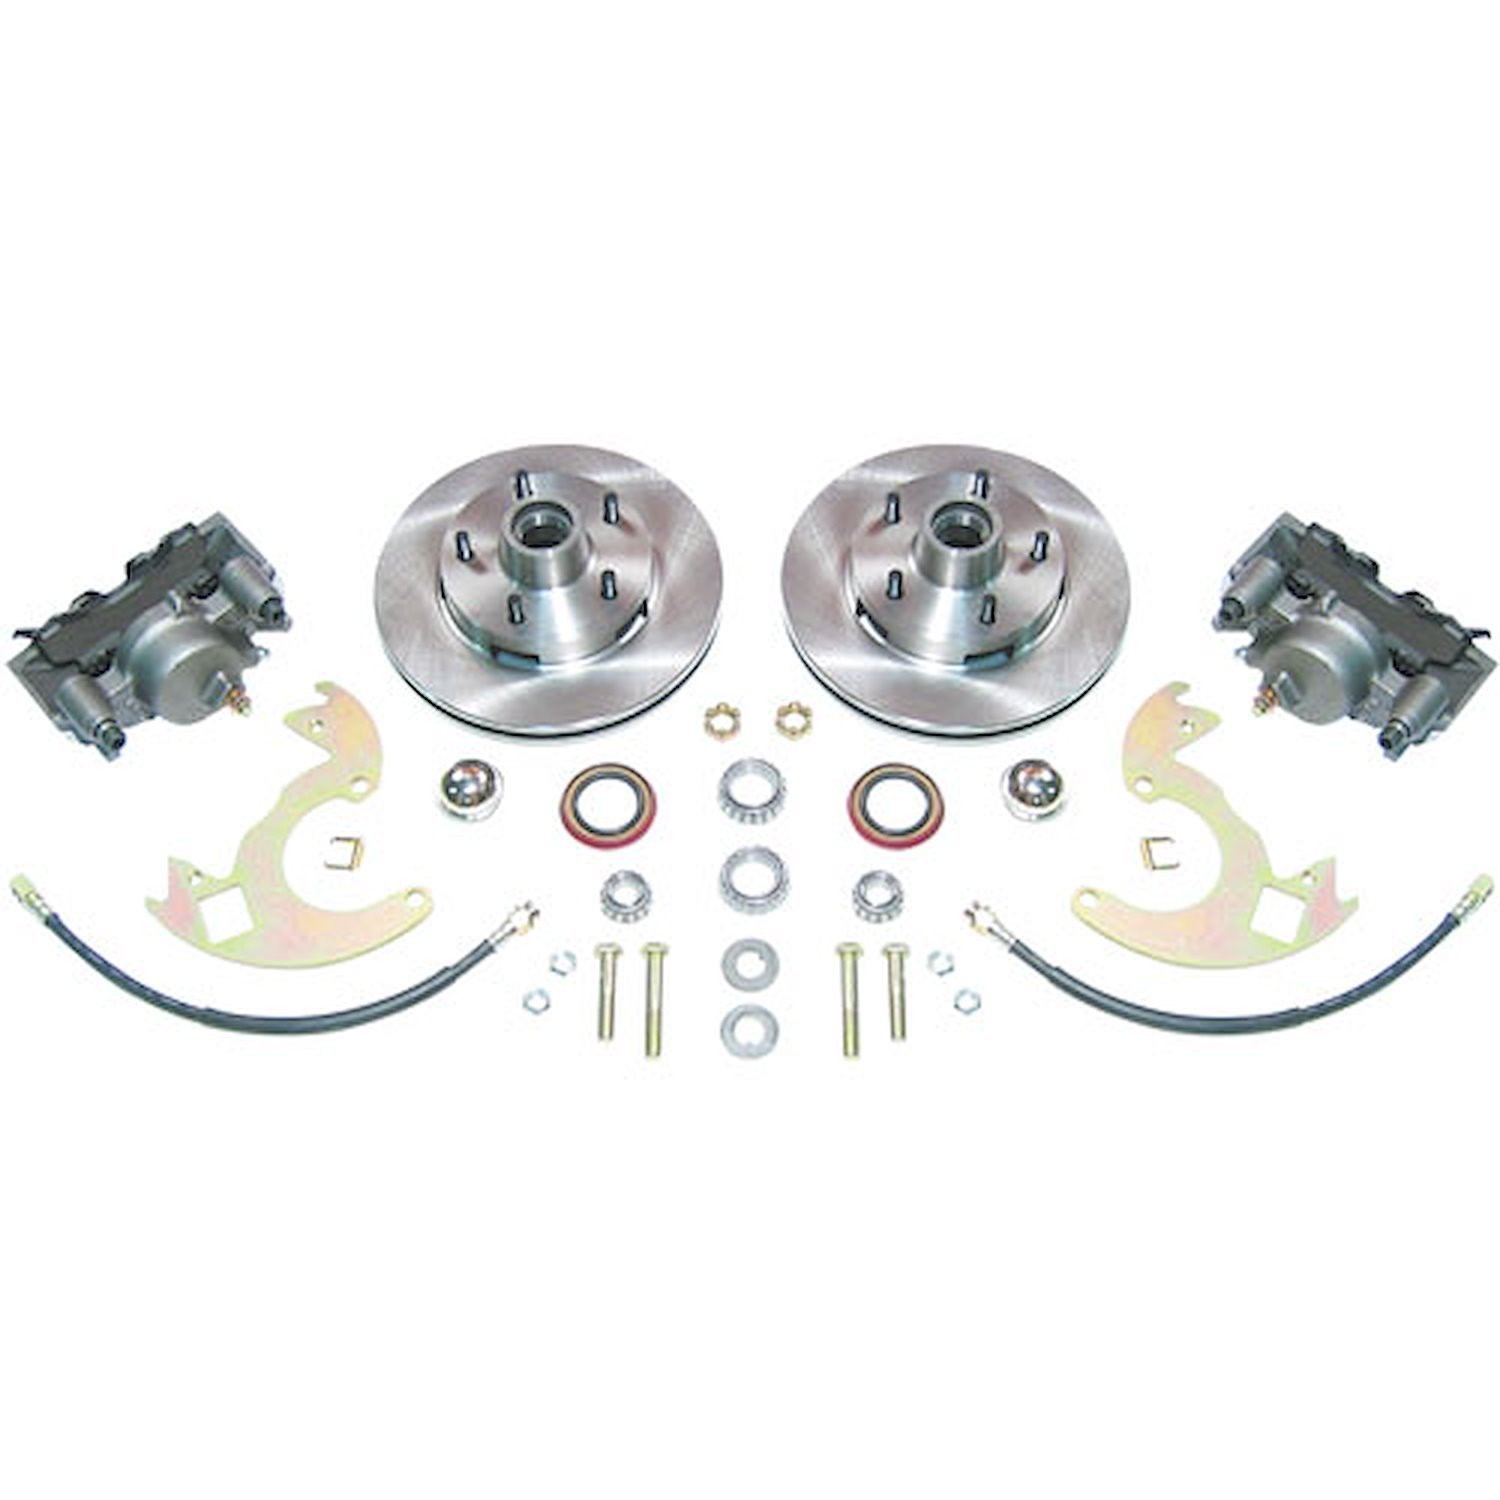 Standard Disc Conversion 14IN. Wheels Master Cylinder AND Valve Kit